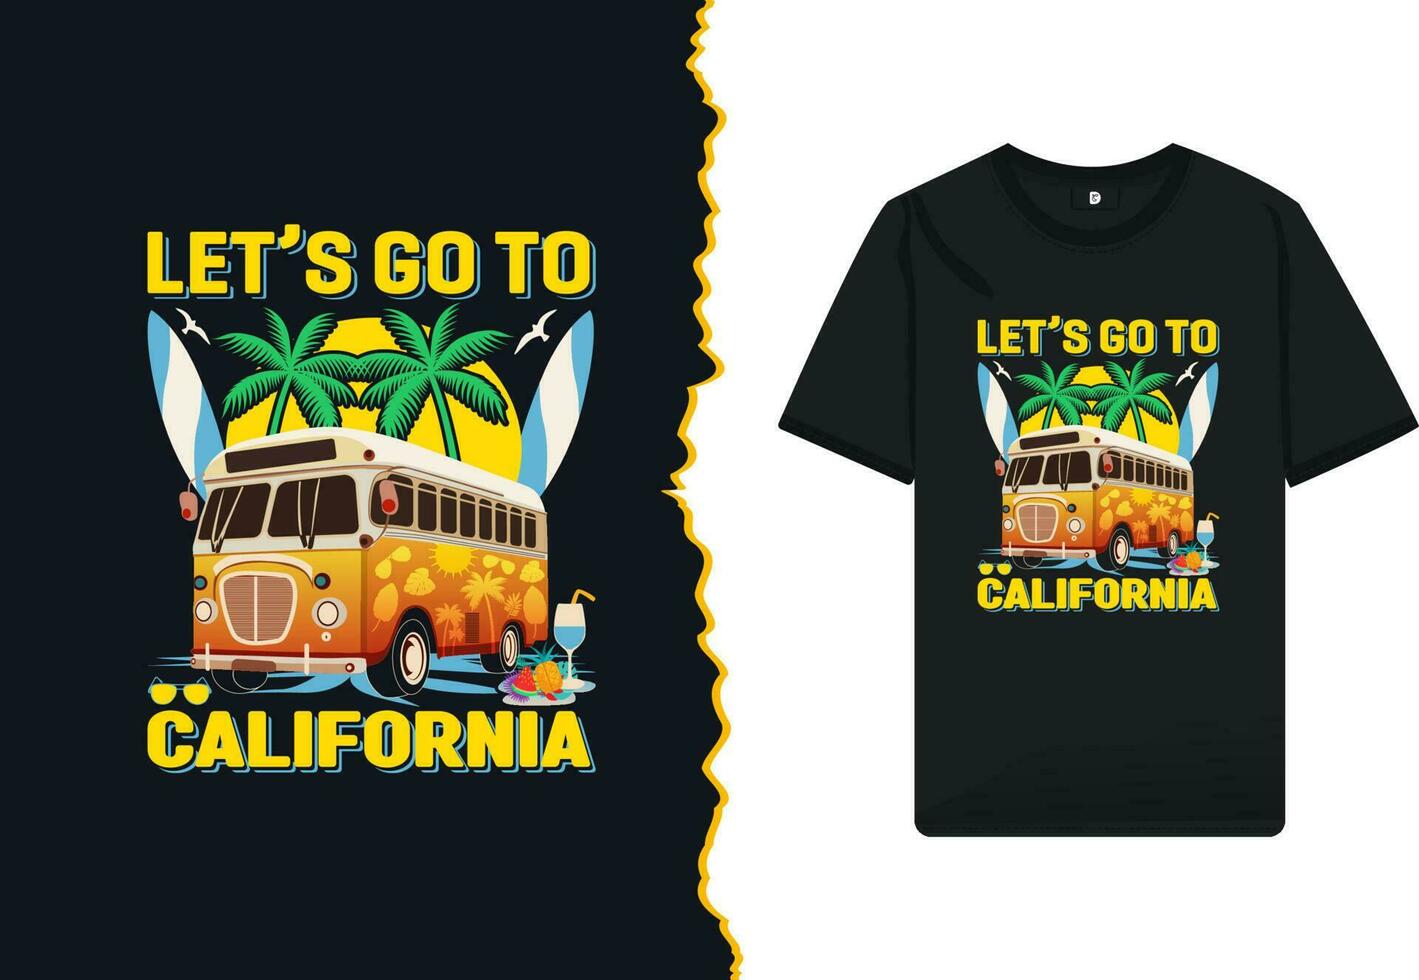 Summer California travel t-shirt design template. Illustration with beach, surfboard, sunrise, palm tree, and sunglass silhouette. this design can be used for kids and other print items. vector